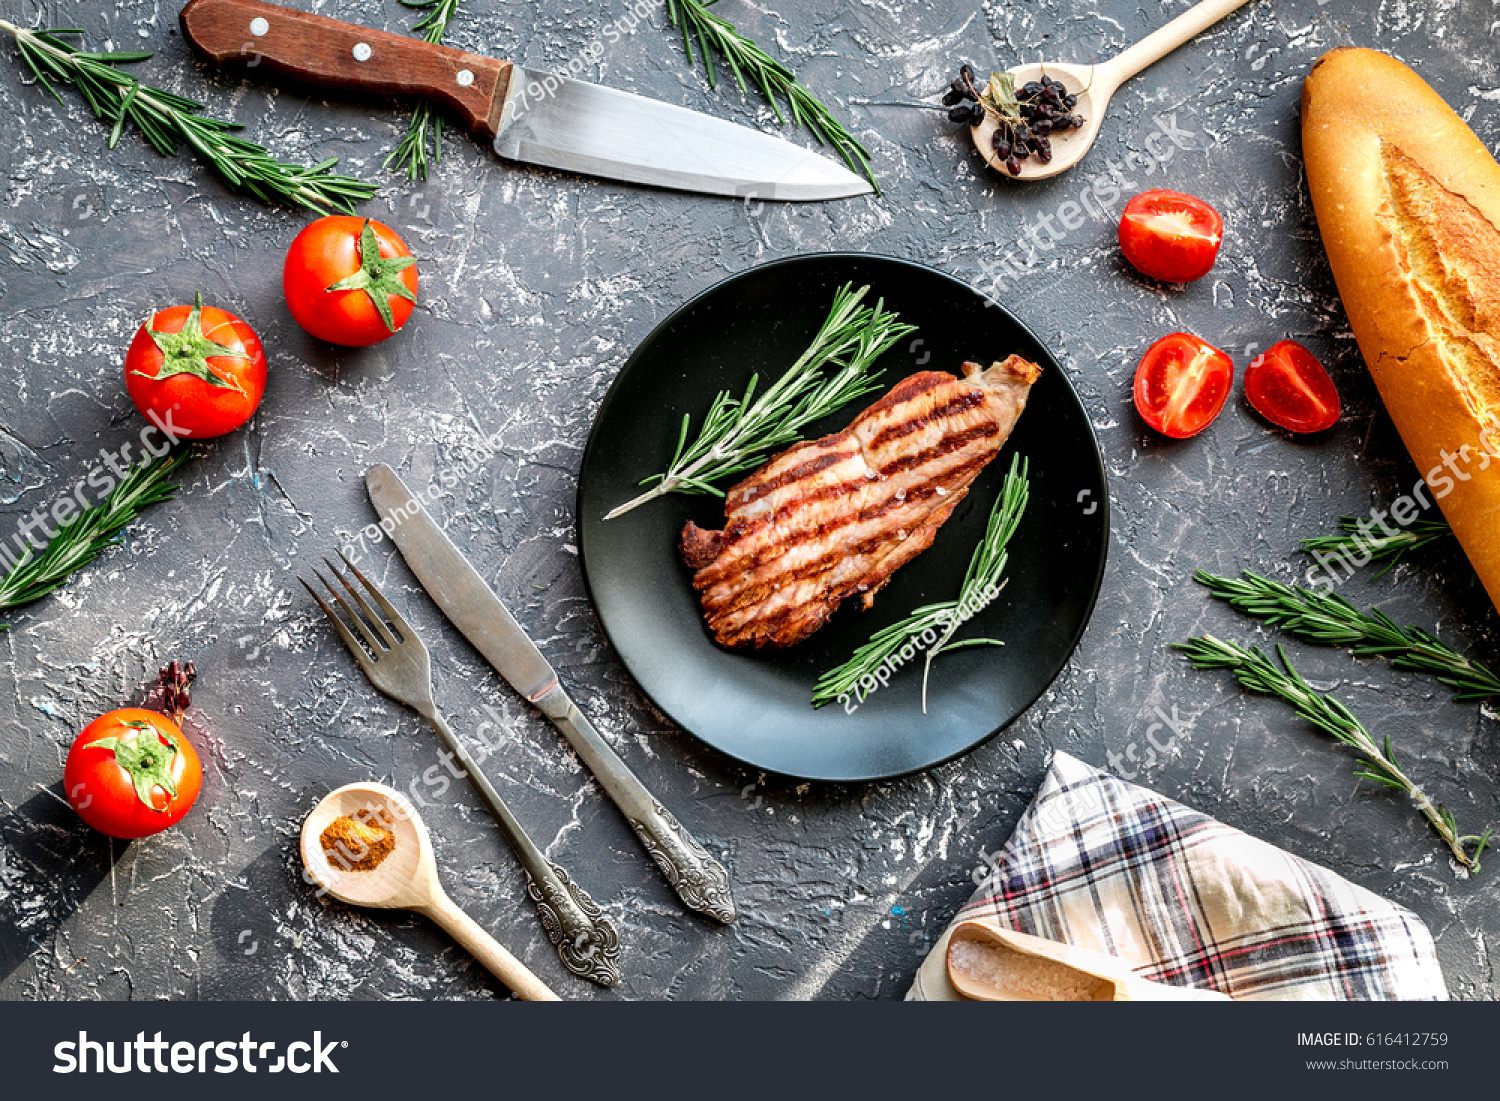 pork steak in home food concept on gray background top view #616412759